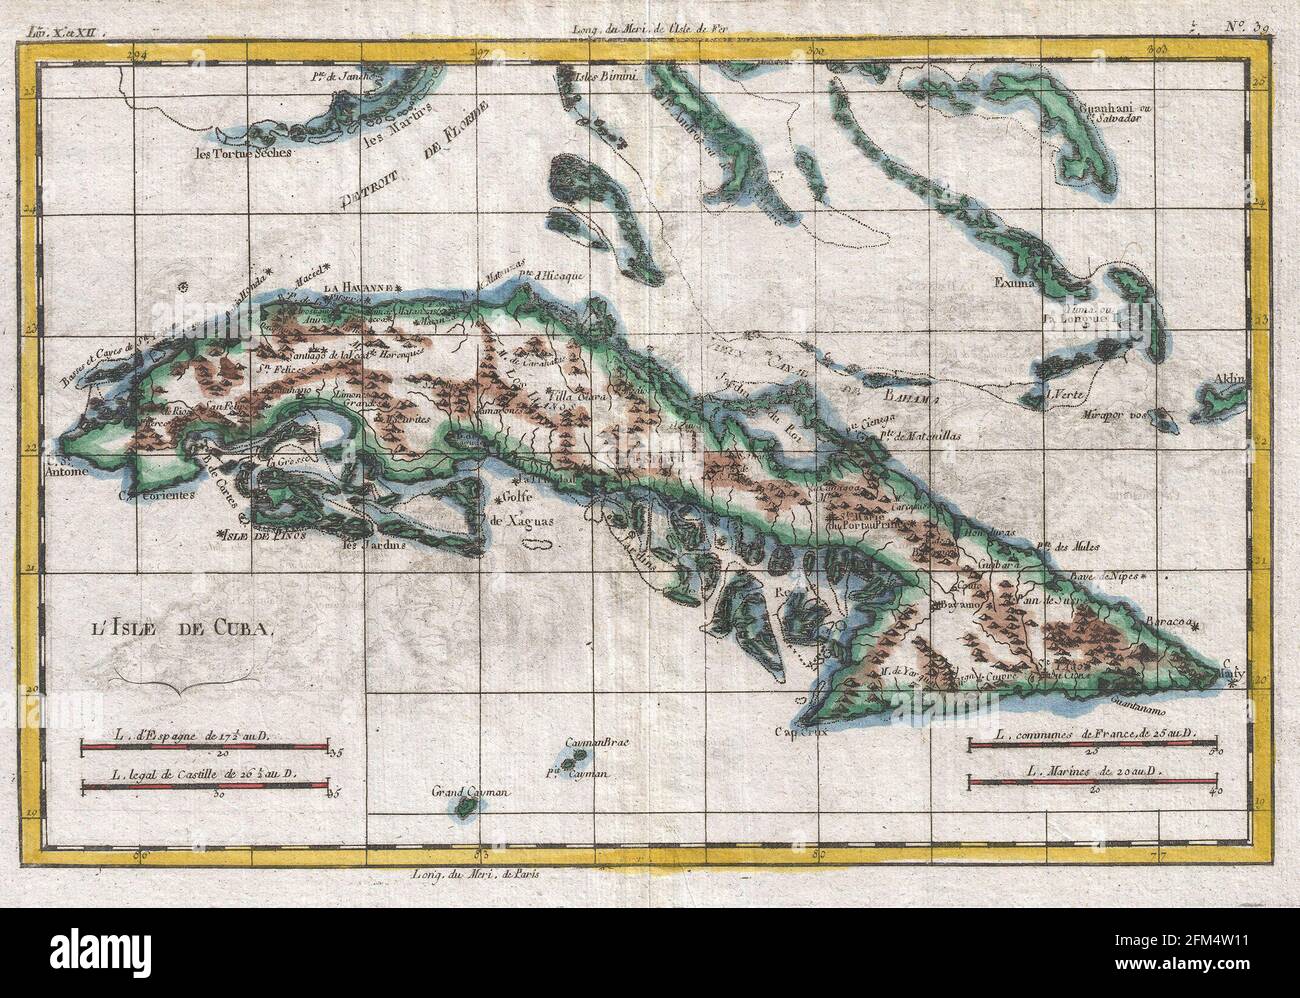 Vintage copper engraved map of Cuba from 18th century. All maps are beautifully colored and illustrated showing the world at the time. Stock Photo